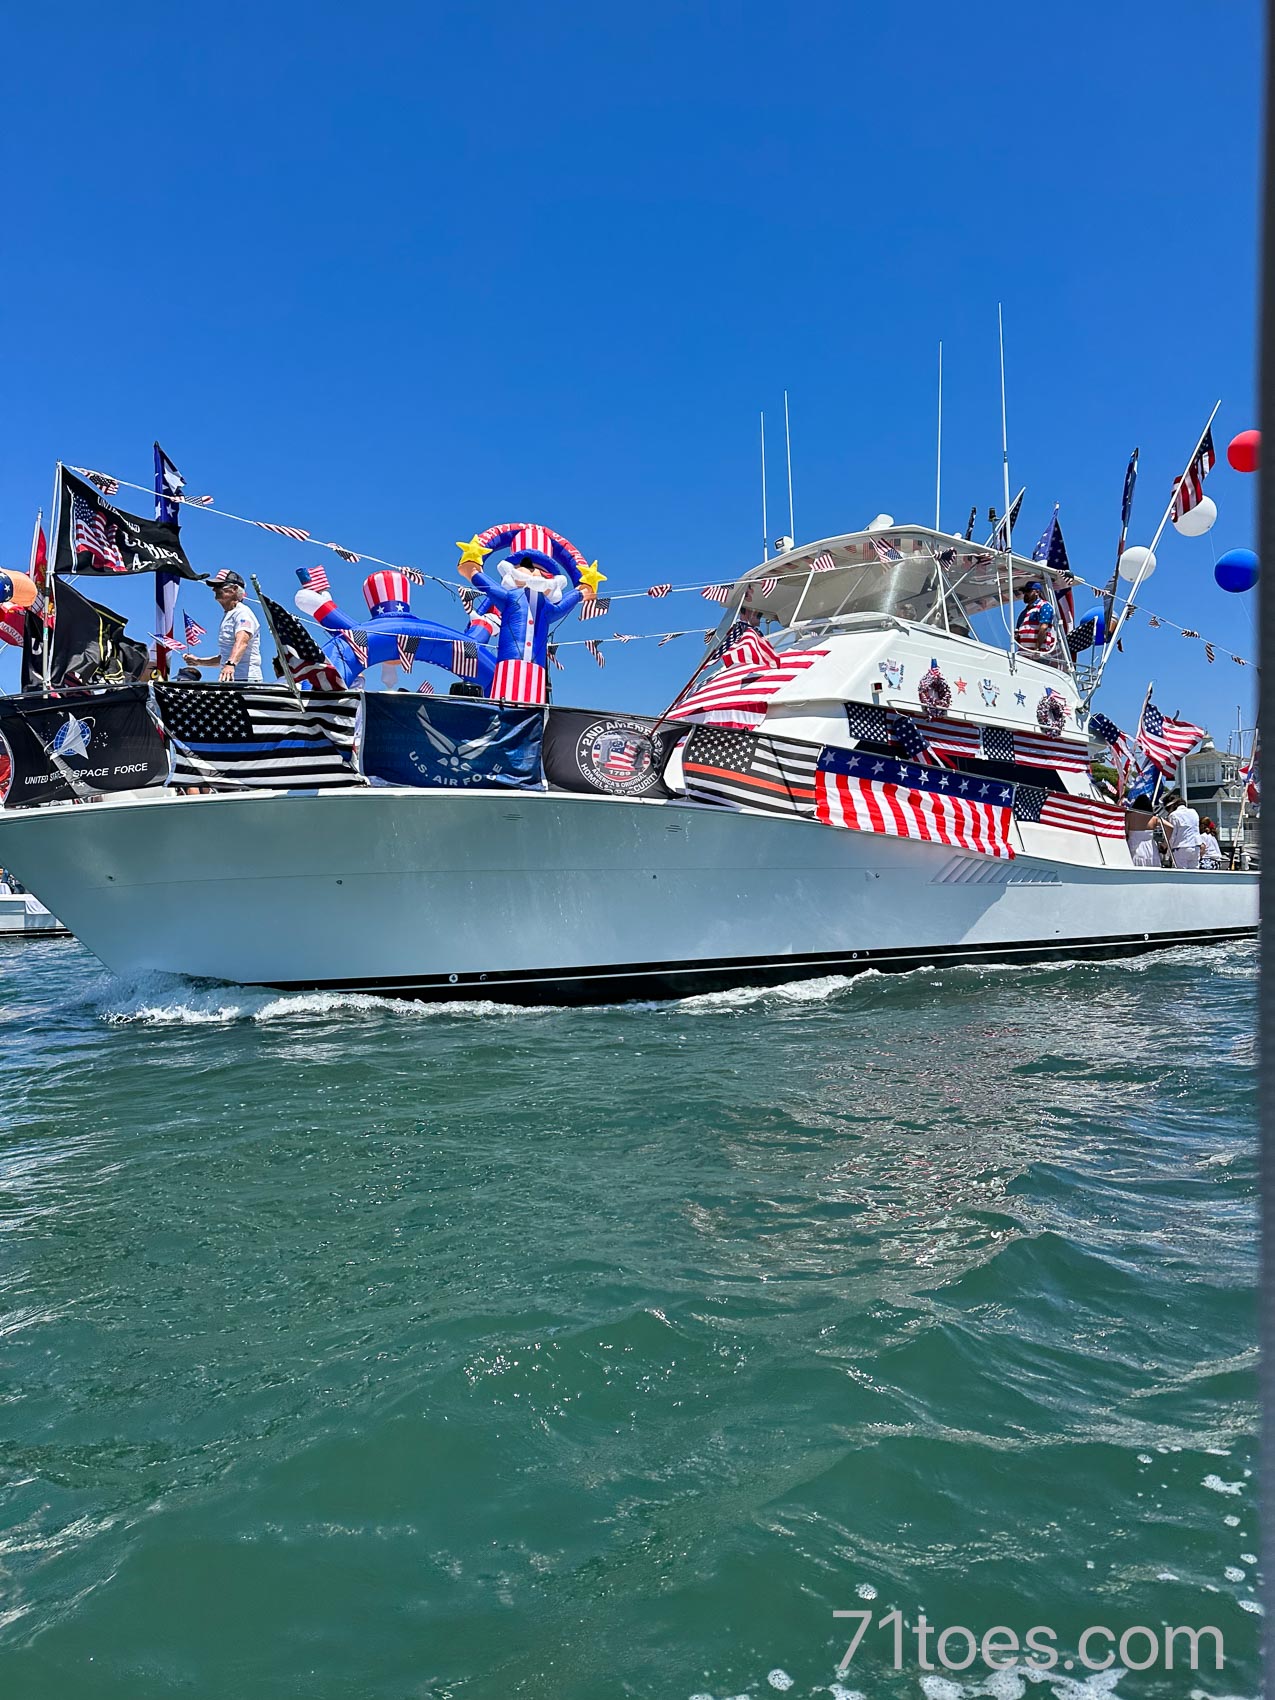 Boats all decked out with patriotism for the 4th of July